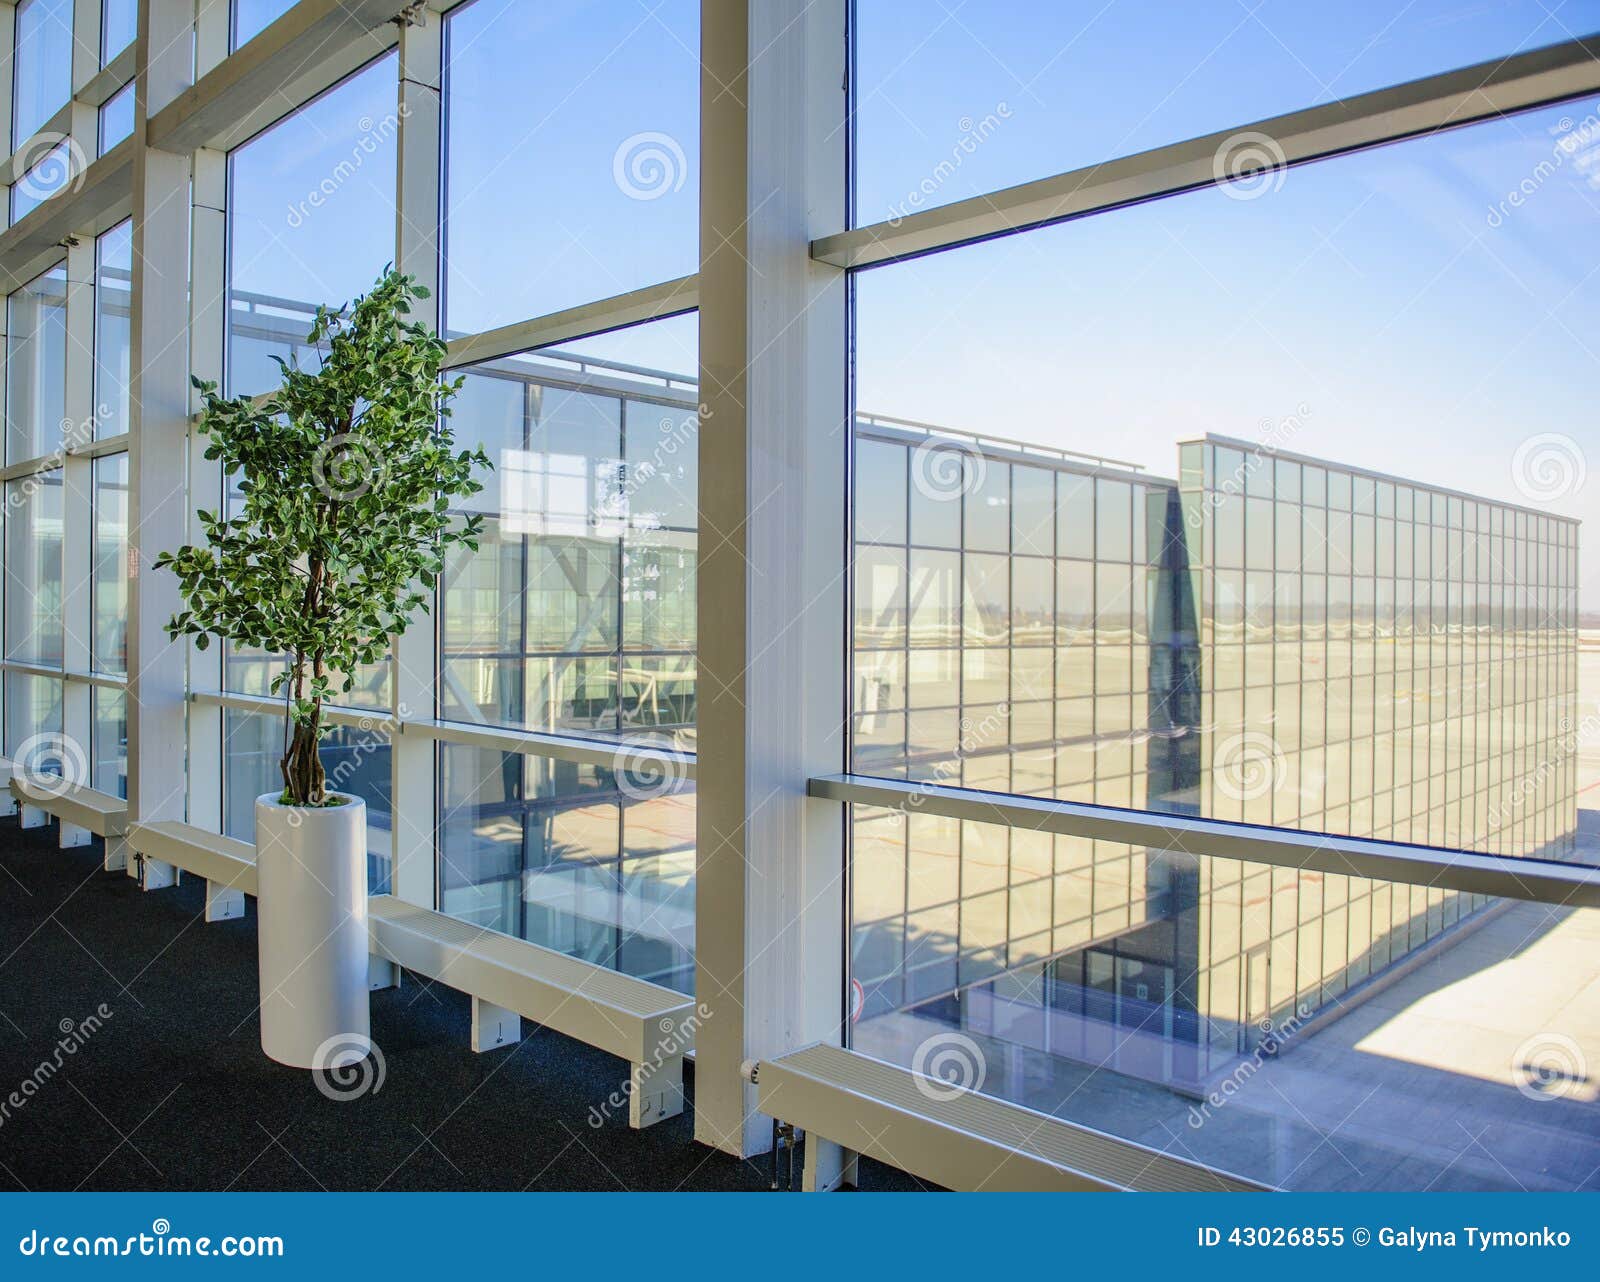 large windows overlooking the donetsk airport